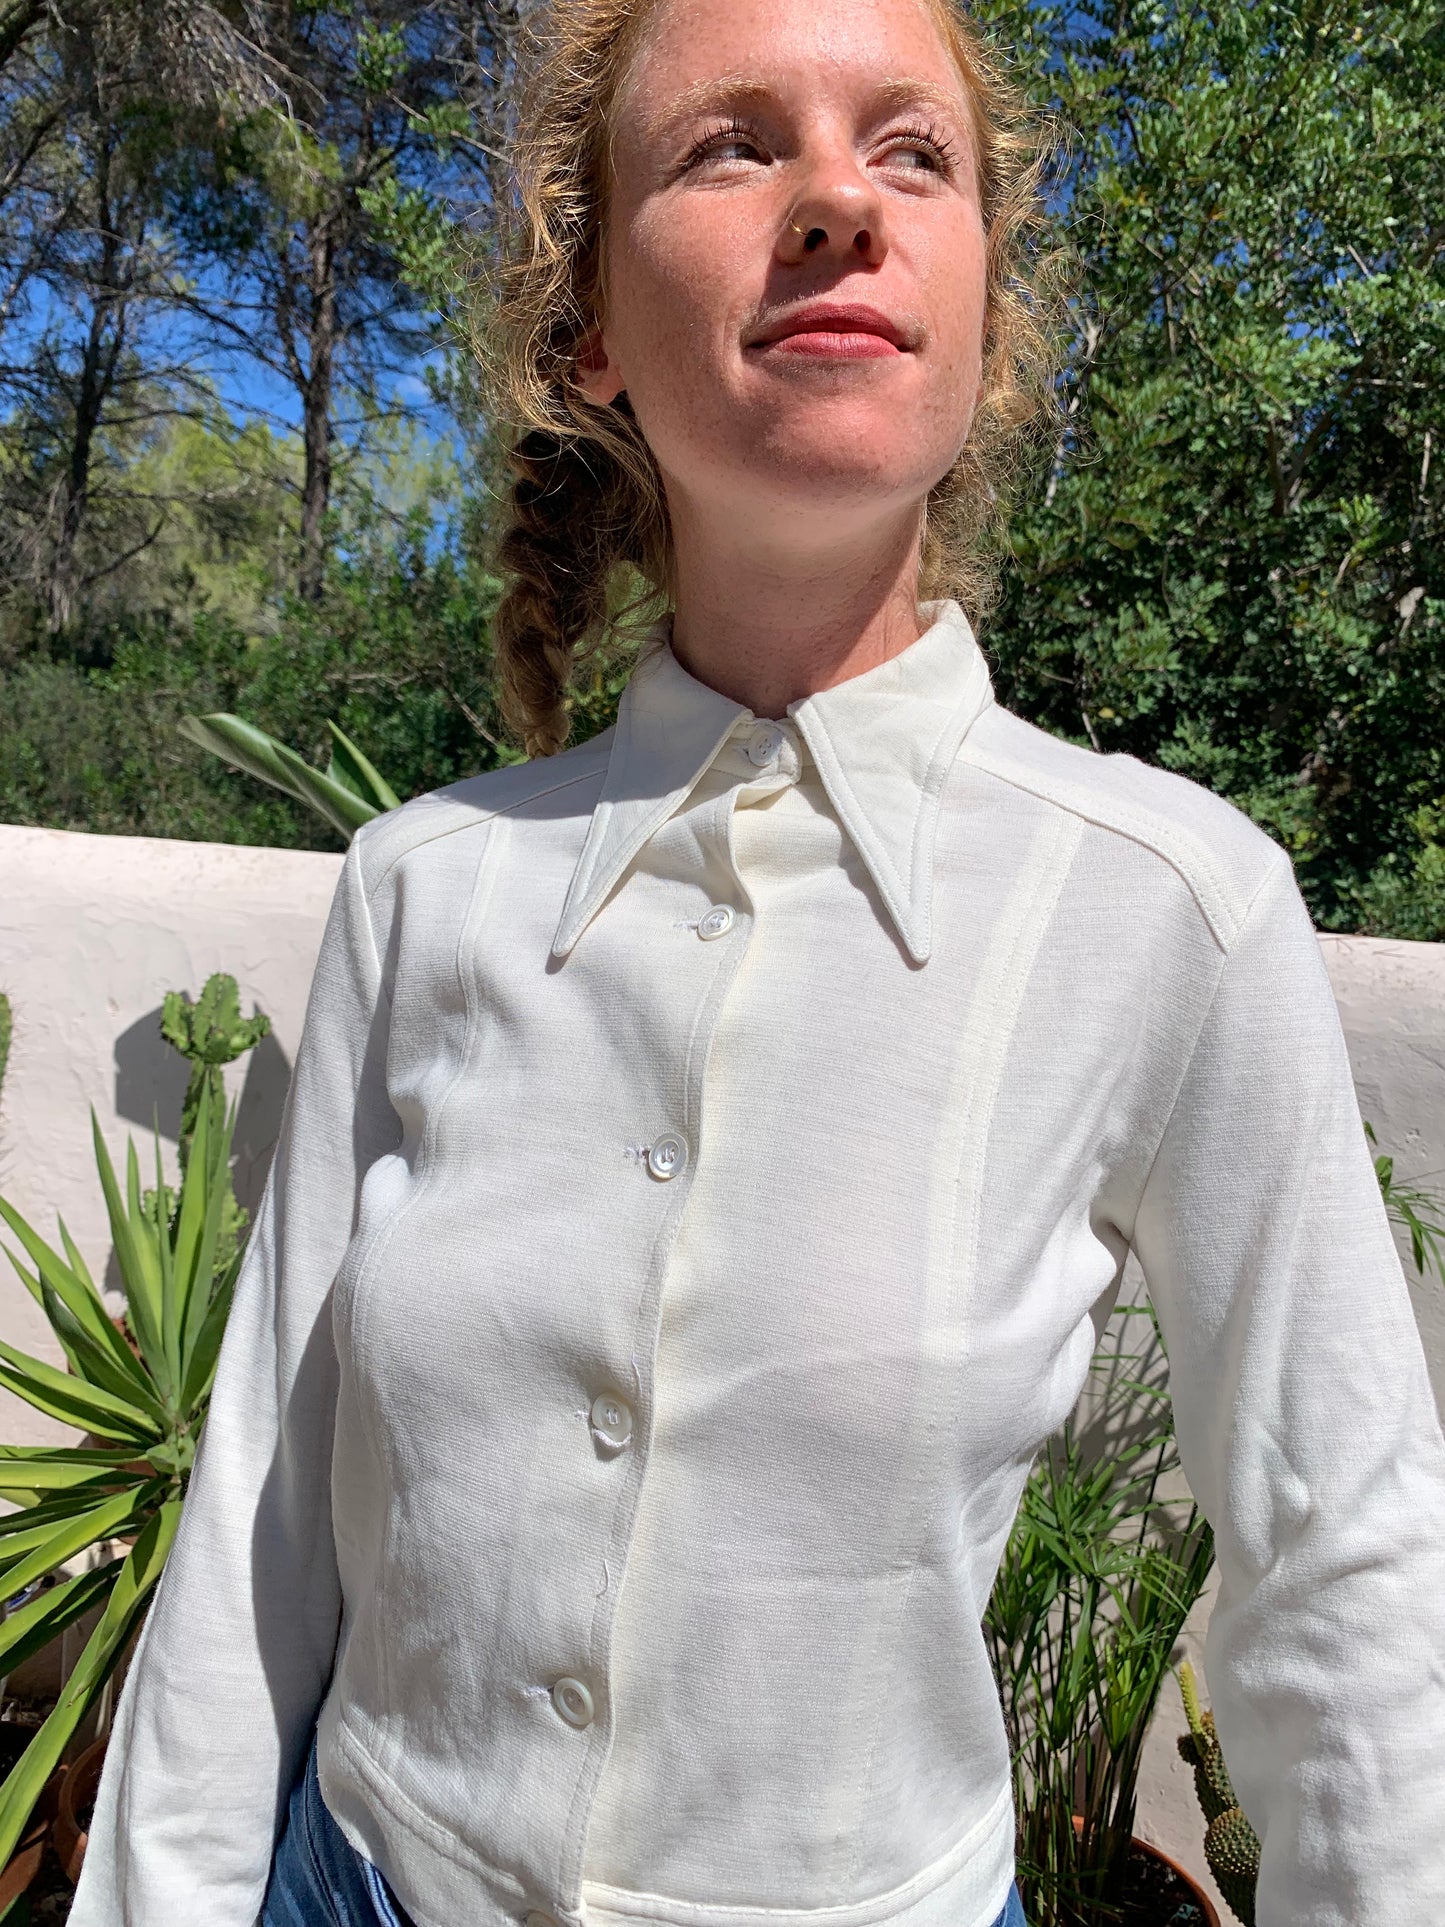 Vintage 1960’s cropped cream jacket shirt super cute  with buttons up the front and oversized collar